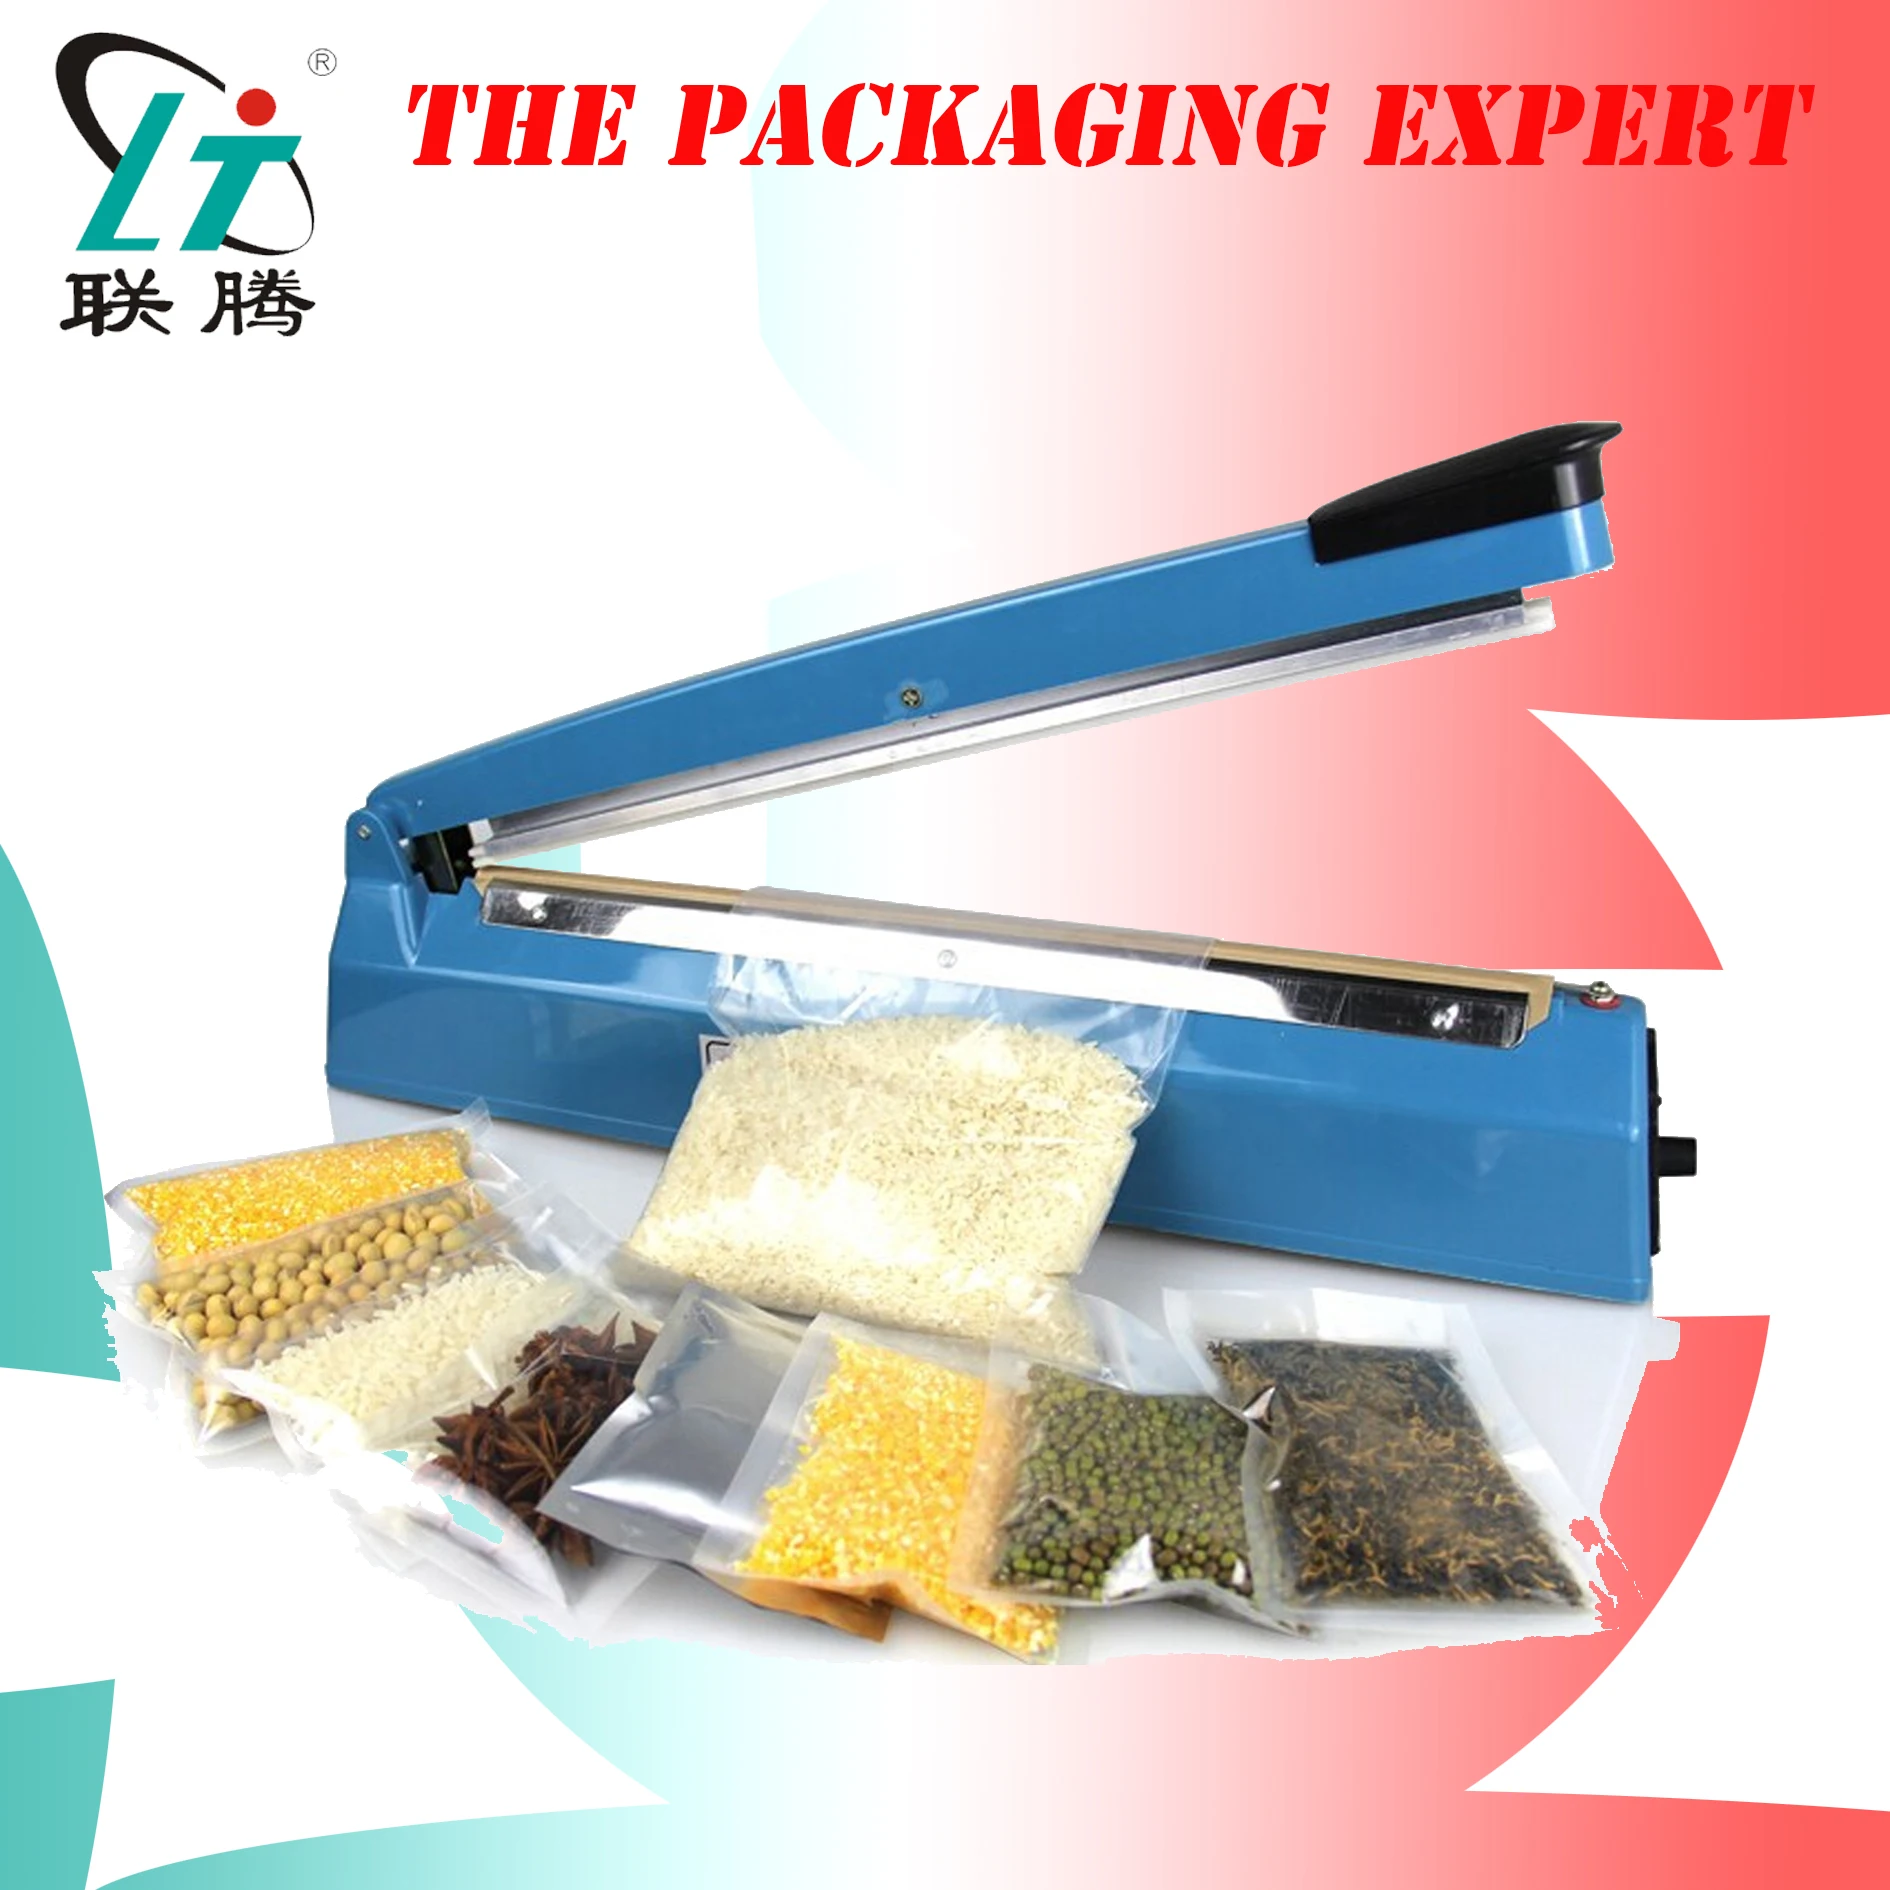 

Impulse Sealer Manual Pouch Sealing Machine Aluminum Plastic Bag Heat Sealer 400mm Packing Device Electric SF-400 Free Shipping